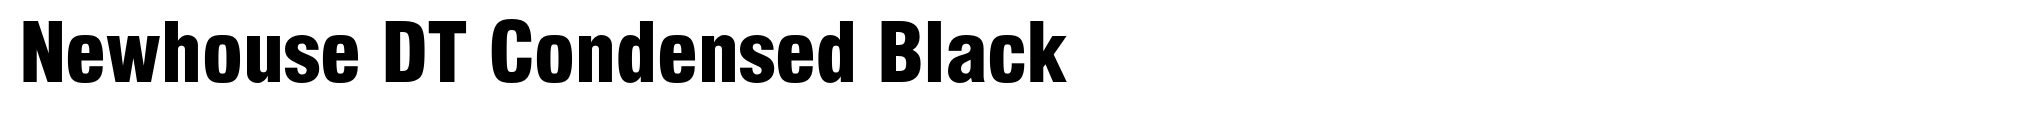 Newhouse DT Condensed Black image